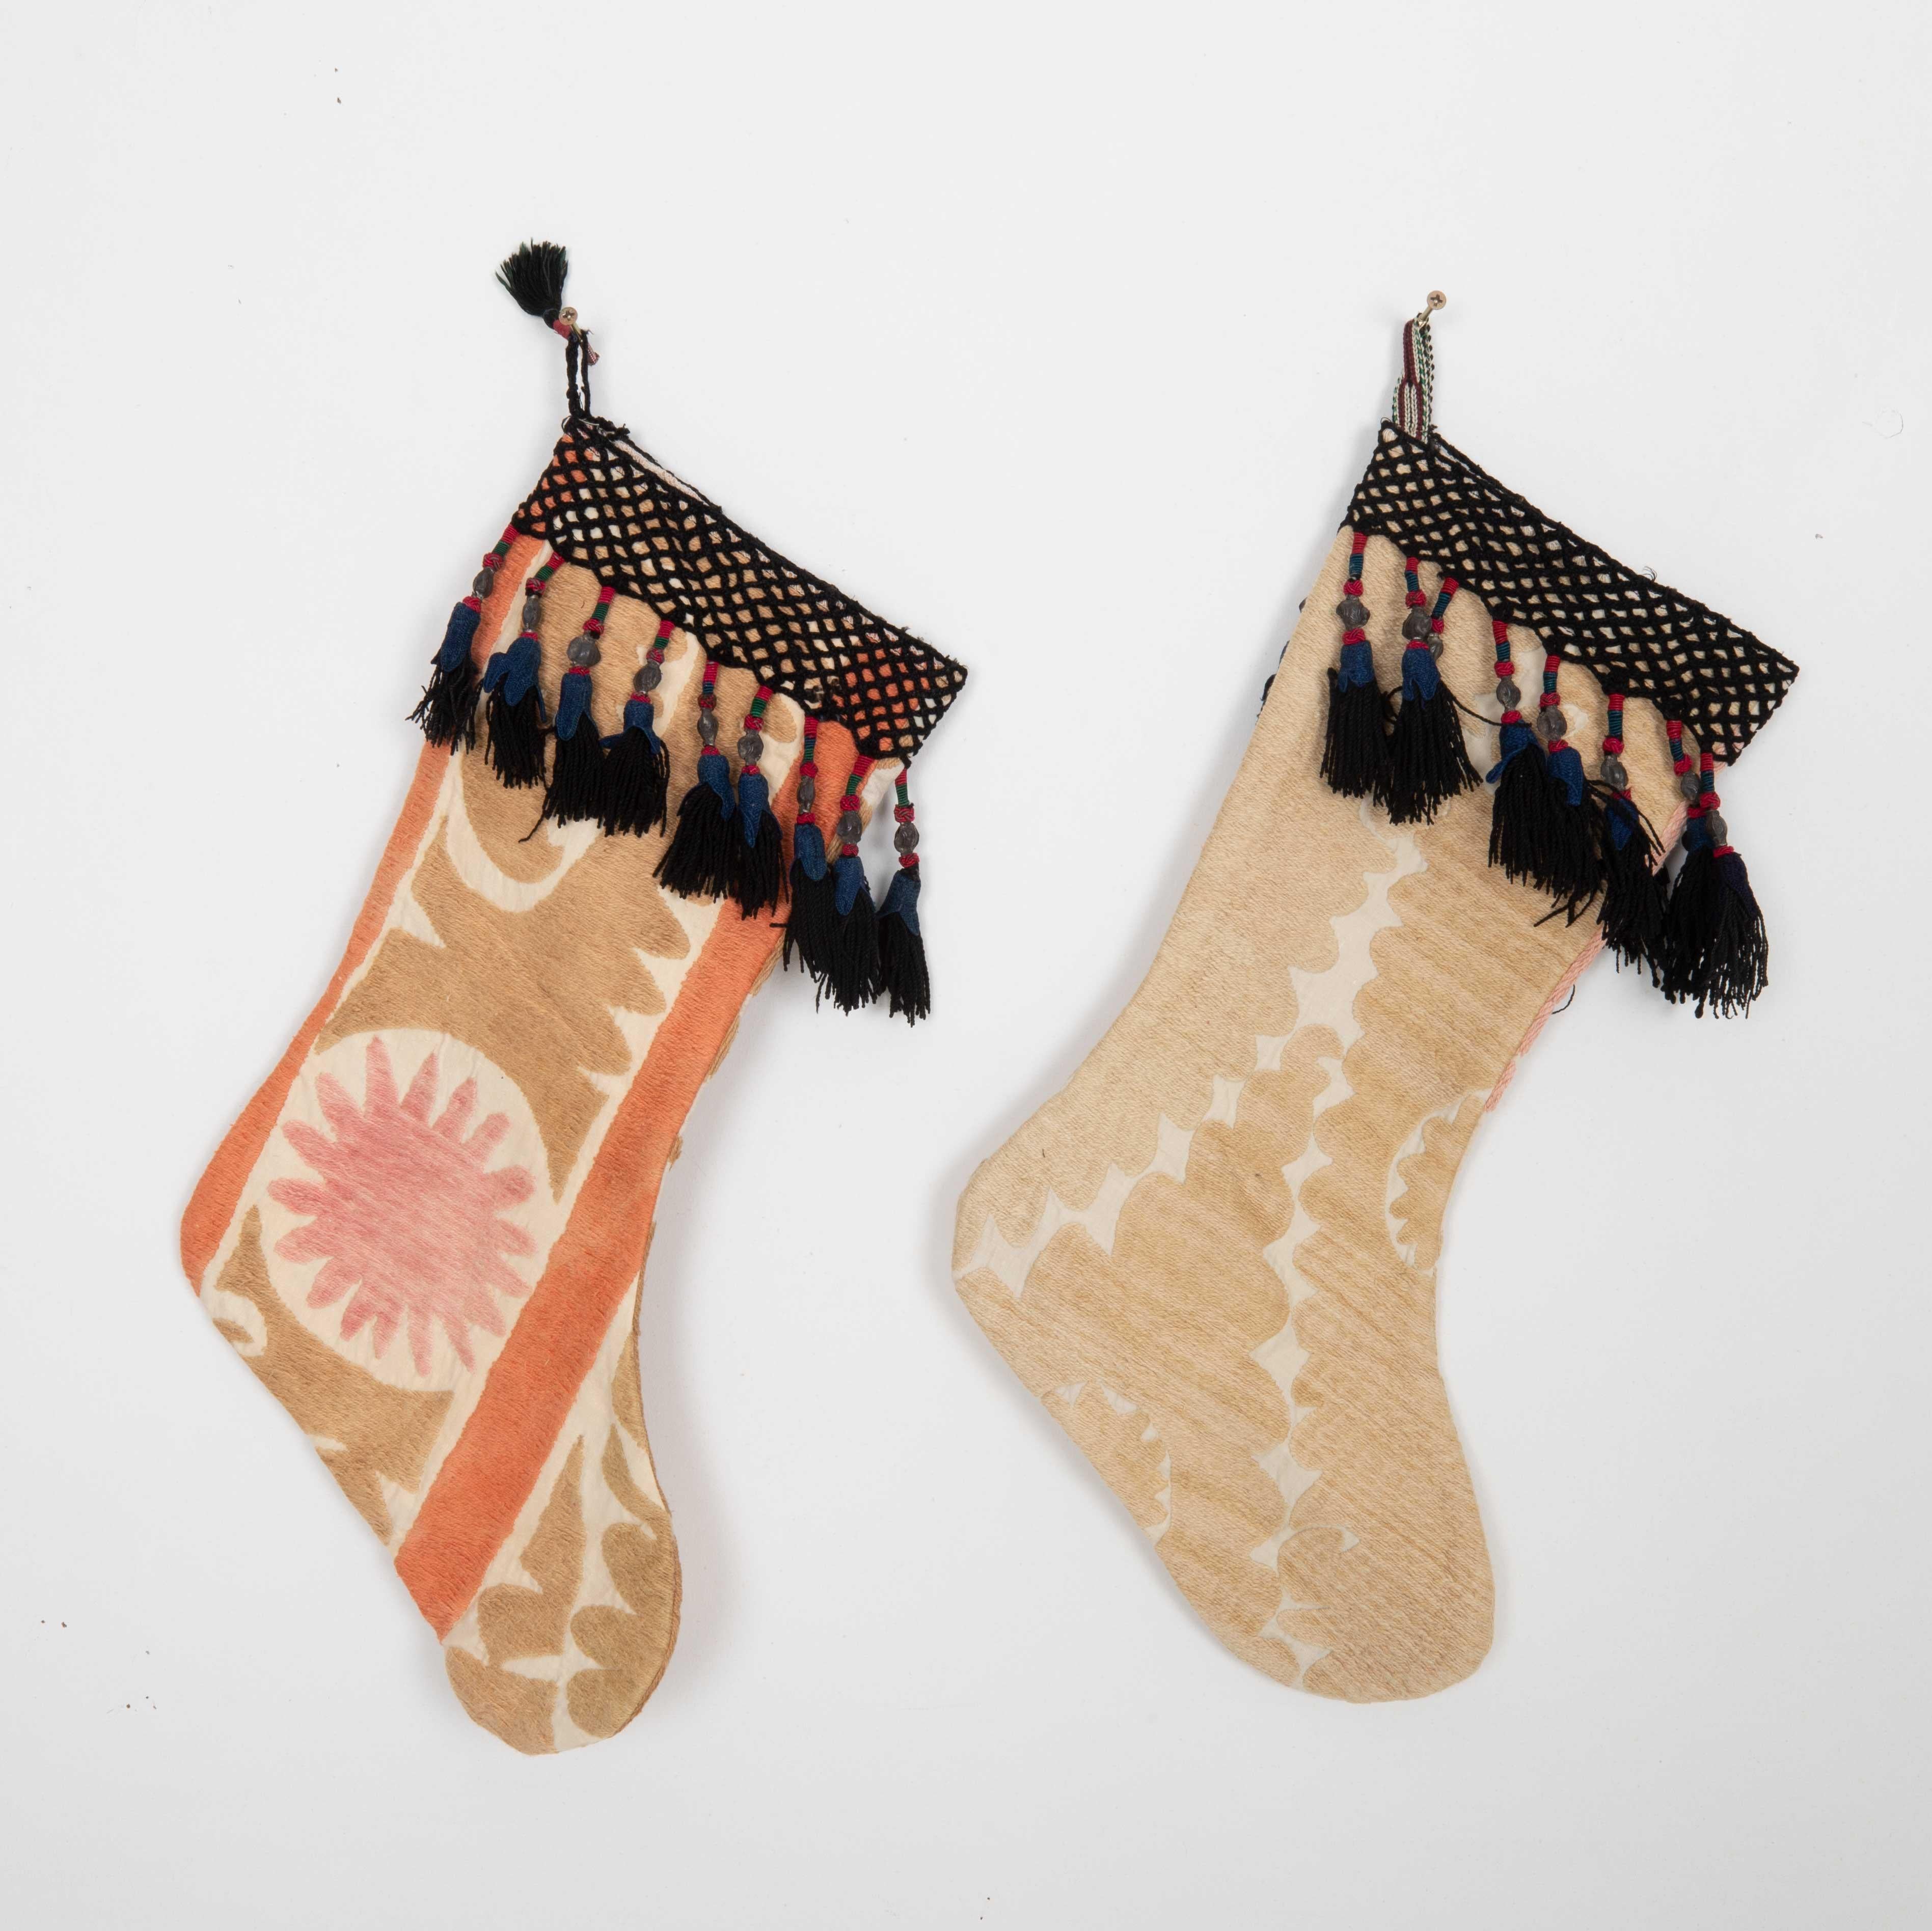 These Christmas Stockings were made from mid 20th C. Uzbek Suzani Fragments.

Please note these were made from vintage suzani fragments.
